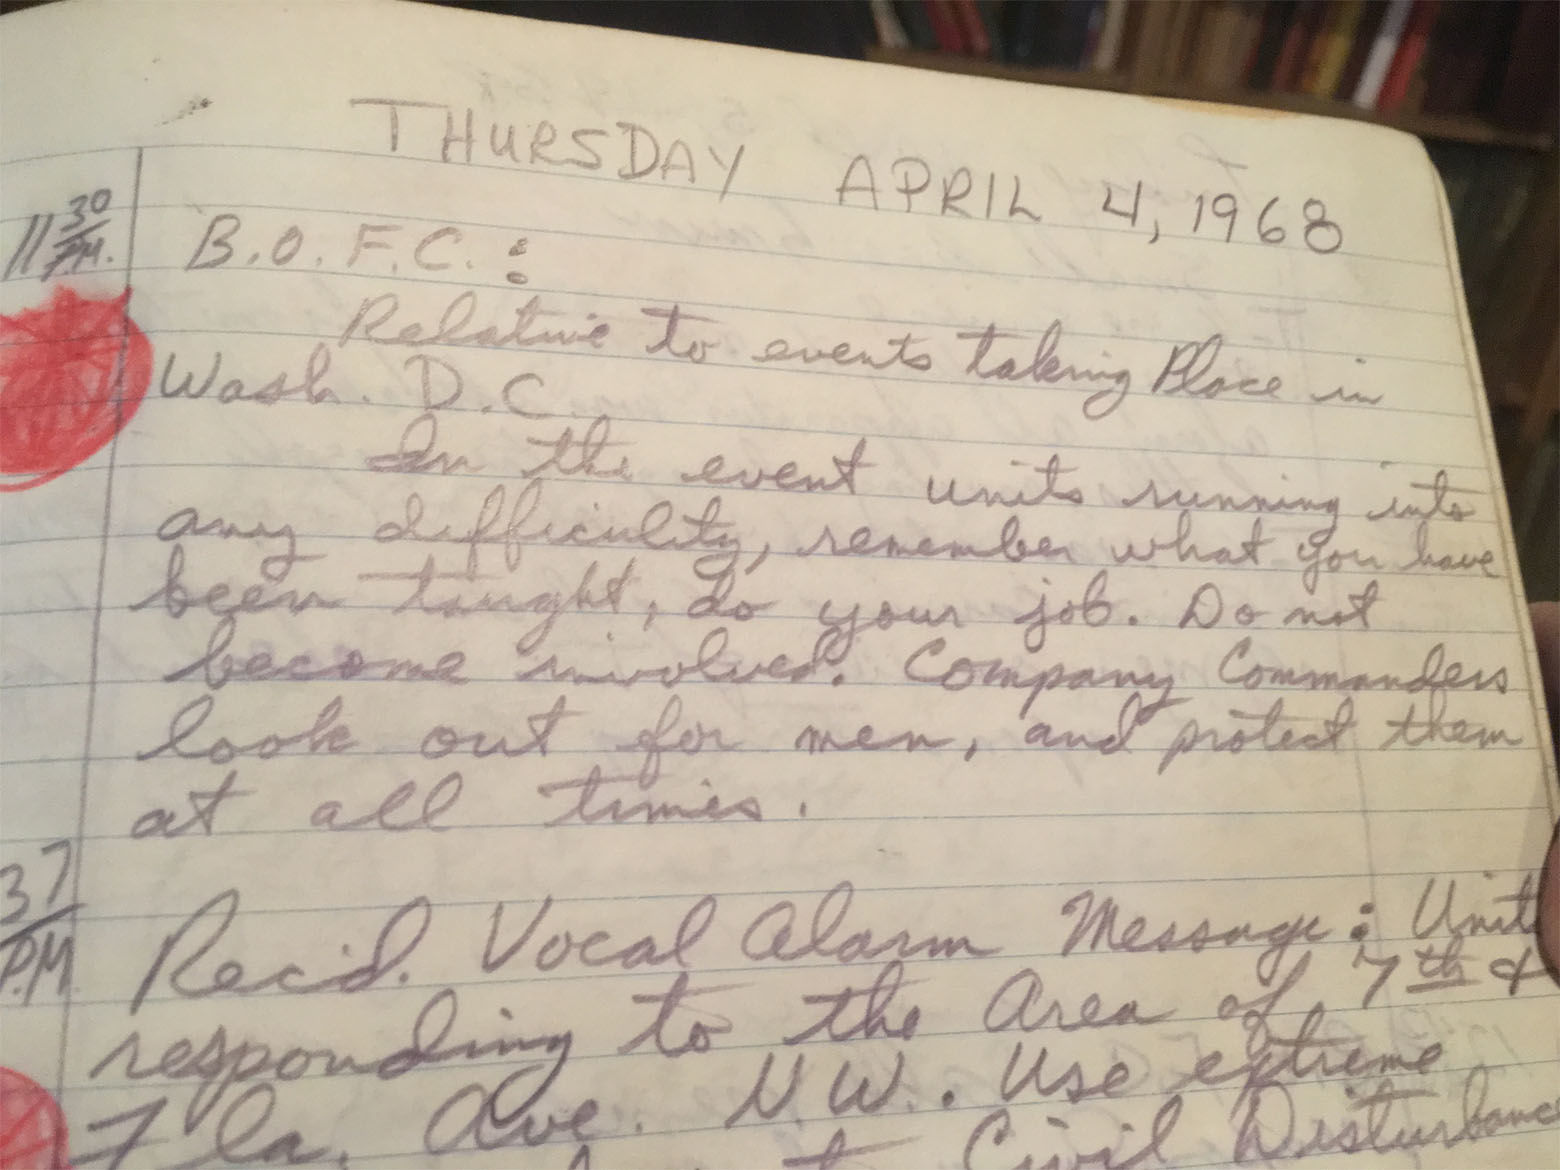 Log books for the fire house on Park Road, which are stored at the D.C. Fire and EMS Museum, detail exactly when and where the fires began spreading. In this page from April 4, 1968 a message from the fire chief is noted: "Relative to the events taking place in Wash. D.C.: In the event units running into any difficulty, remember what you have been taught, do your job. Do not become involved. Company commanders, look out for the men, and protect them at all times." (Courtesy D.C. Fire and EMS Museum.)